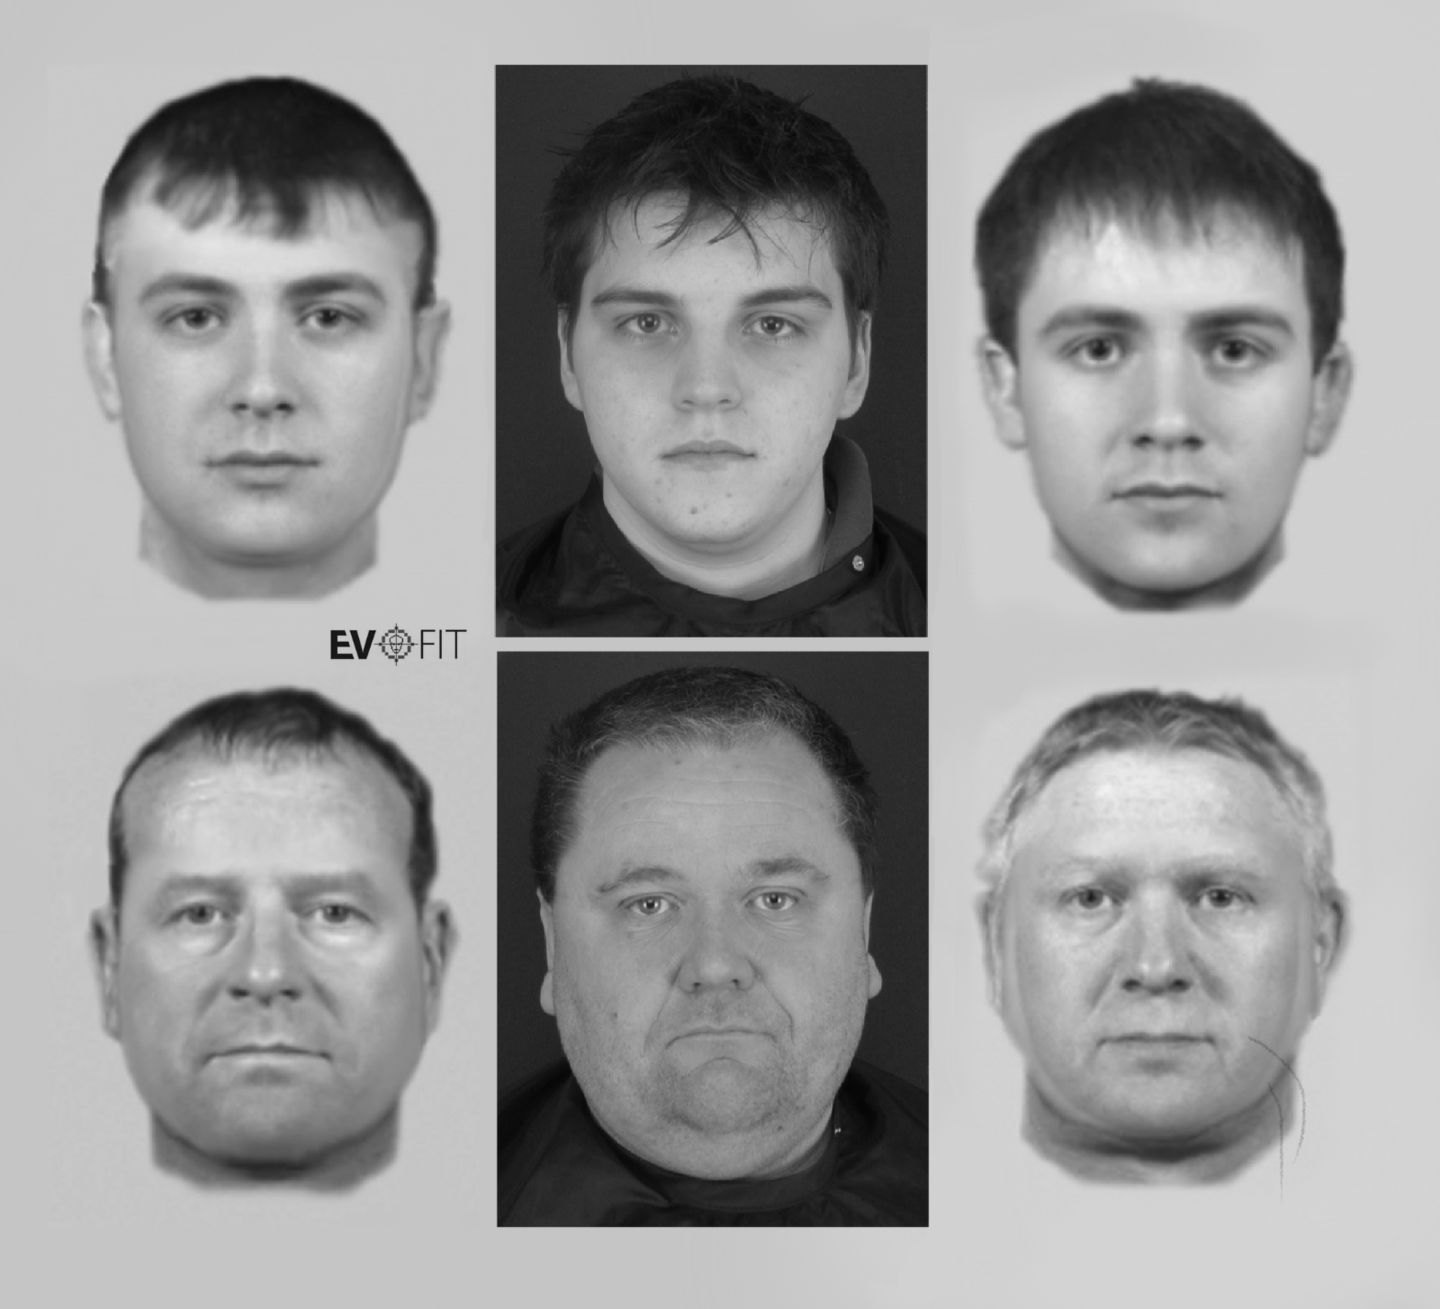 A number of composites along side their initial target. 6 photos overall, all white and male roughly aged 20 and 50.